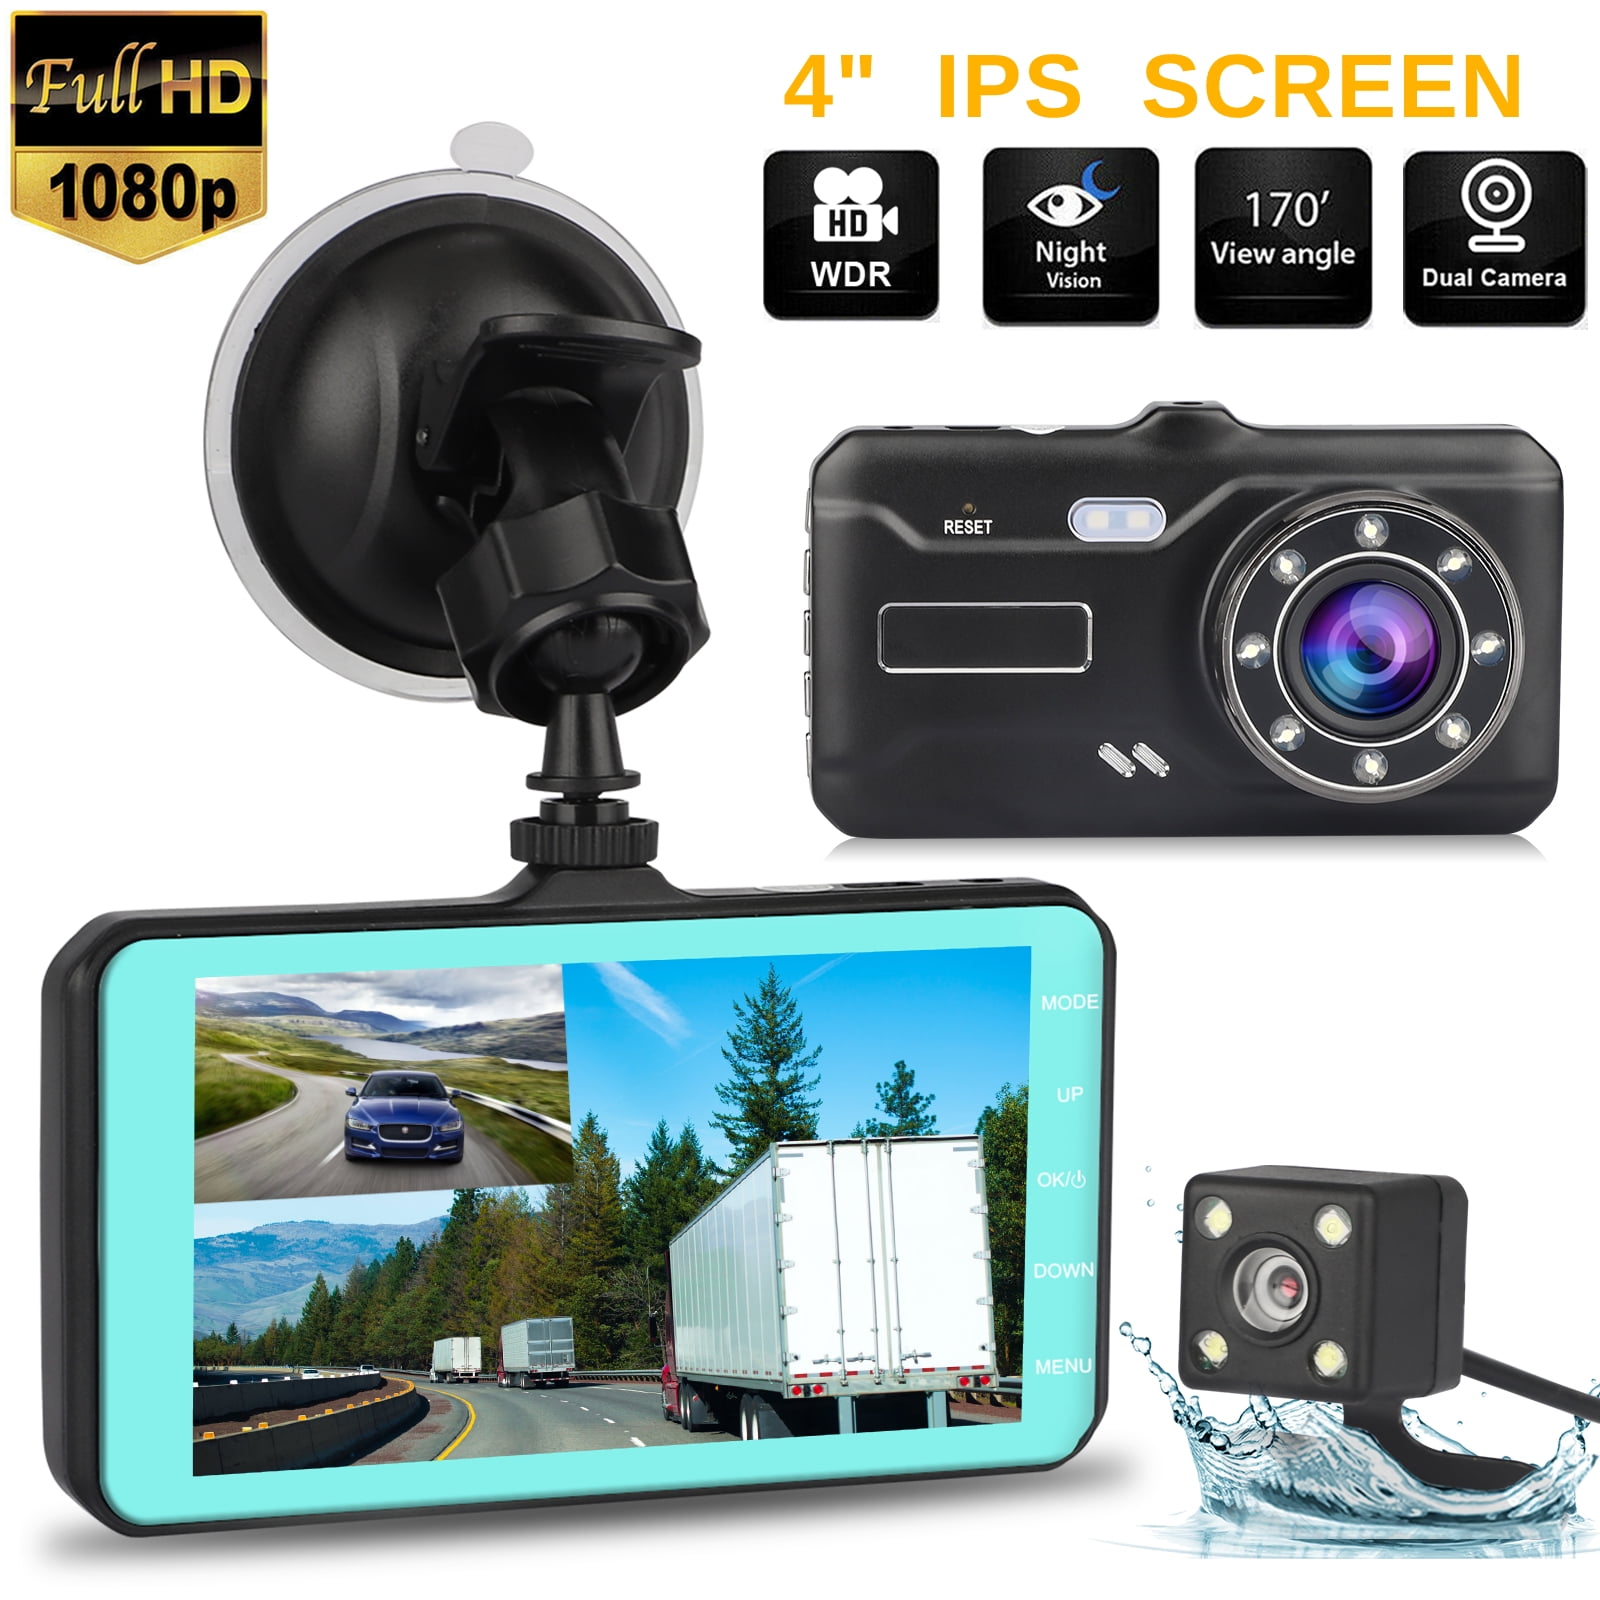 Apexcam Dash Cam Front and Rear Lens Driving Recorder 4 IPS 1080P FHD 170°Wide-Angle Cars Dashboard Backup Camera G-Sensor WDR Loop Recording DVR Parking Monitor Motion Detection Night Vision